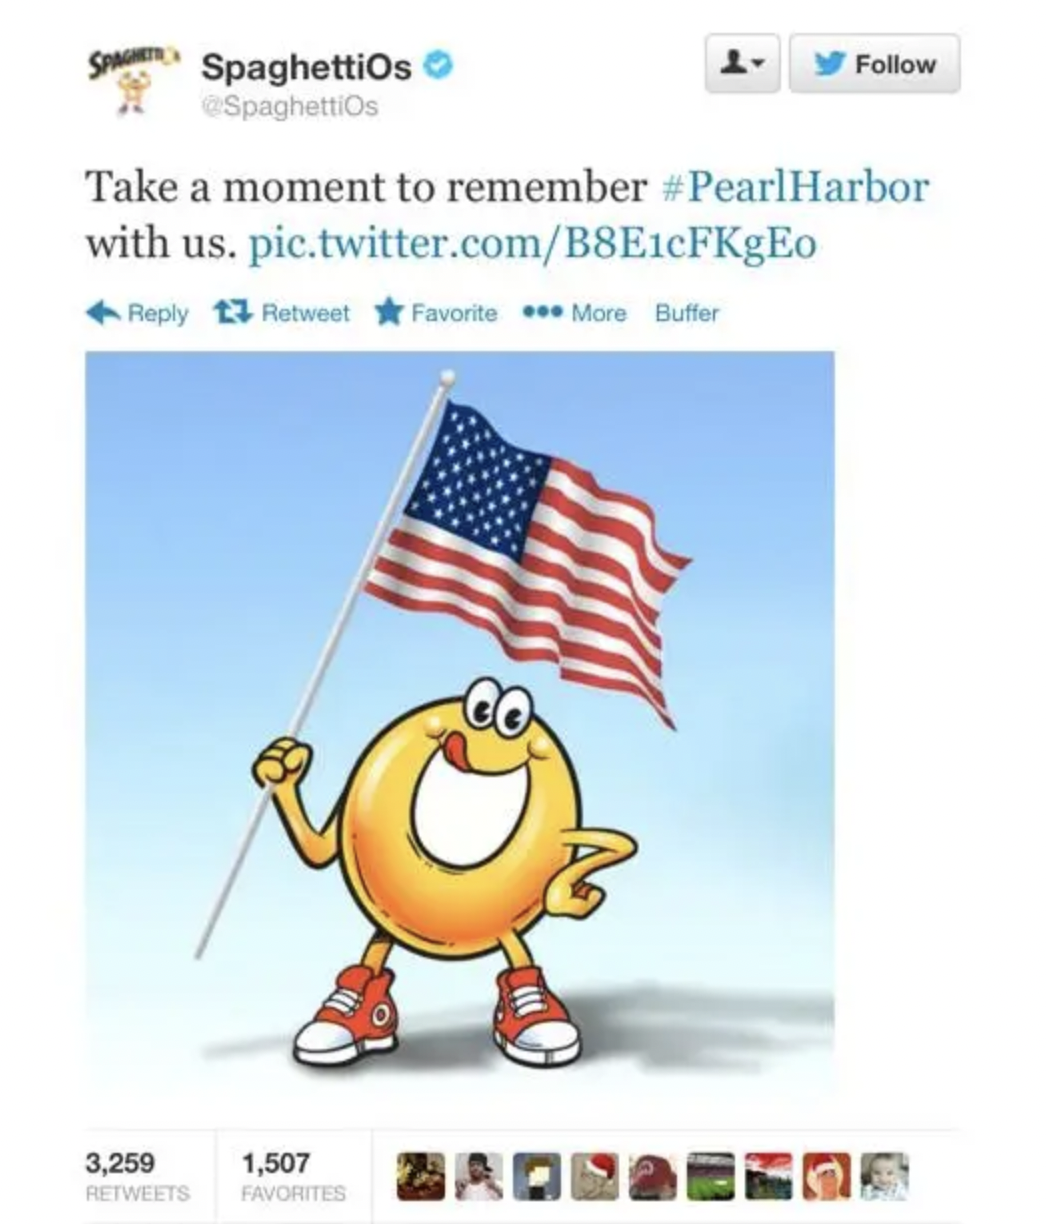 spaghettios pearl harbor - SpaghettiOs SpaghettiOs Take a moment to remember Harbor with us. pic.twitter.comB8E1CFKgEo Retweet Favorite More Buffer 3,259 1,507 Favorites